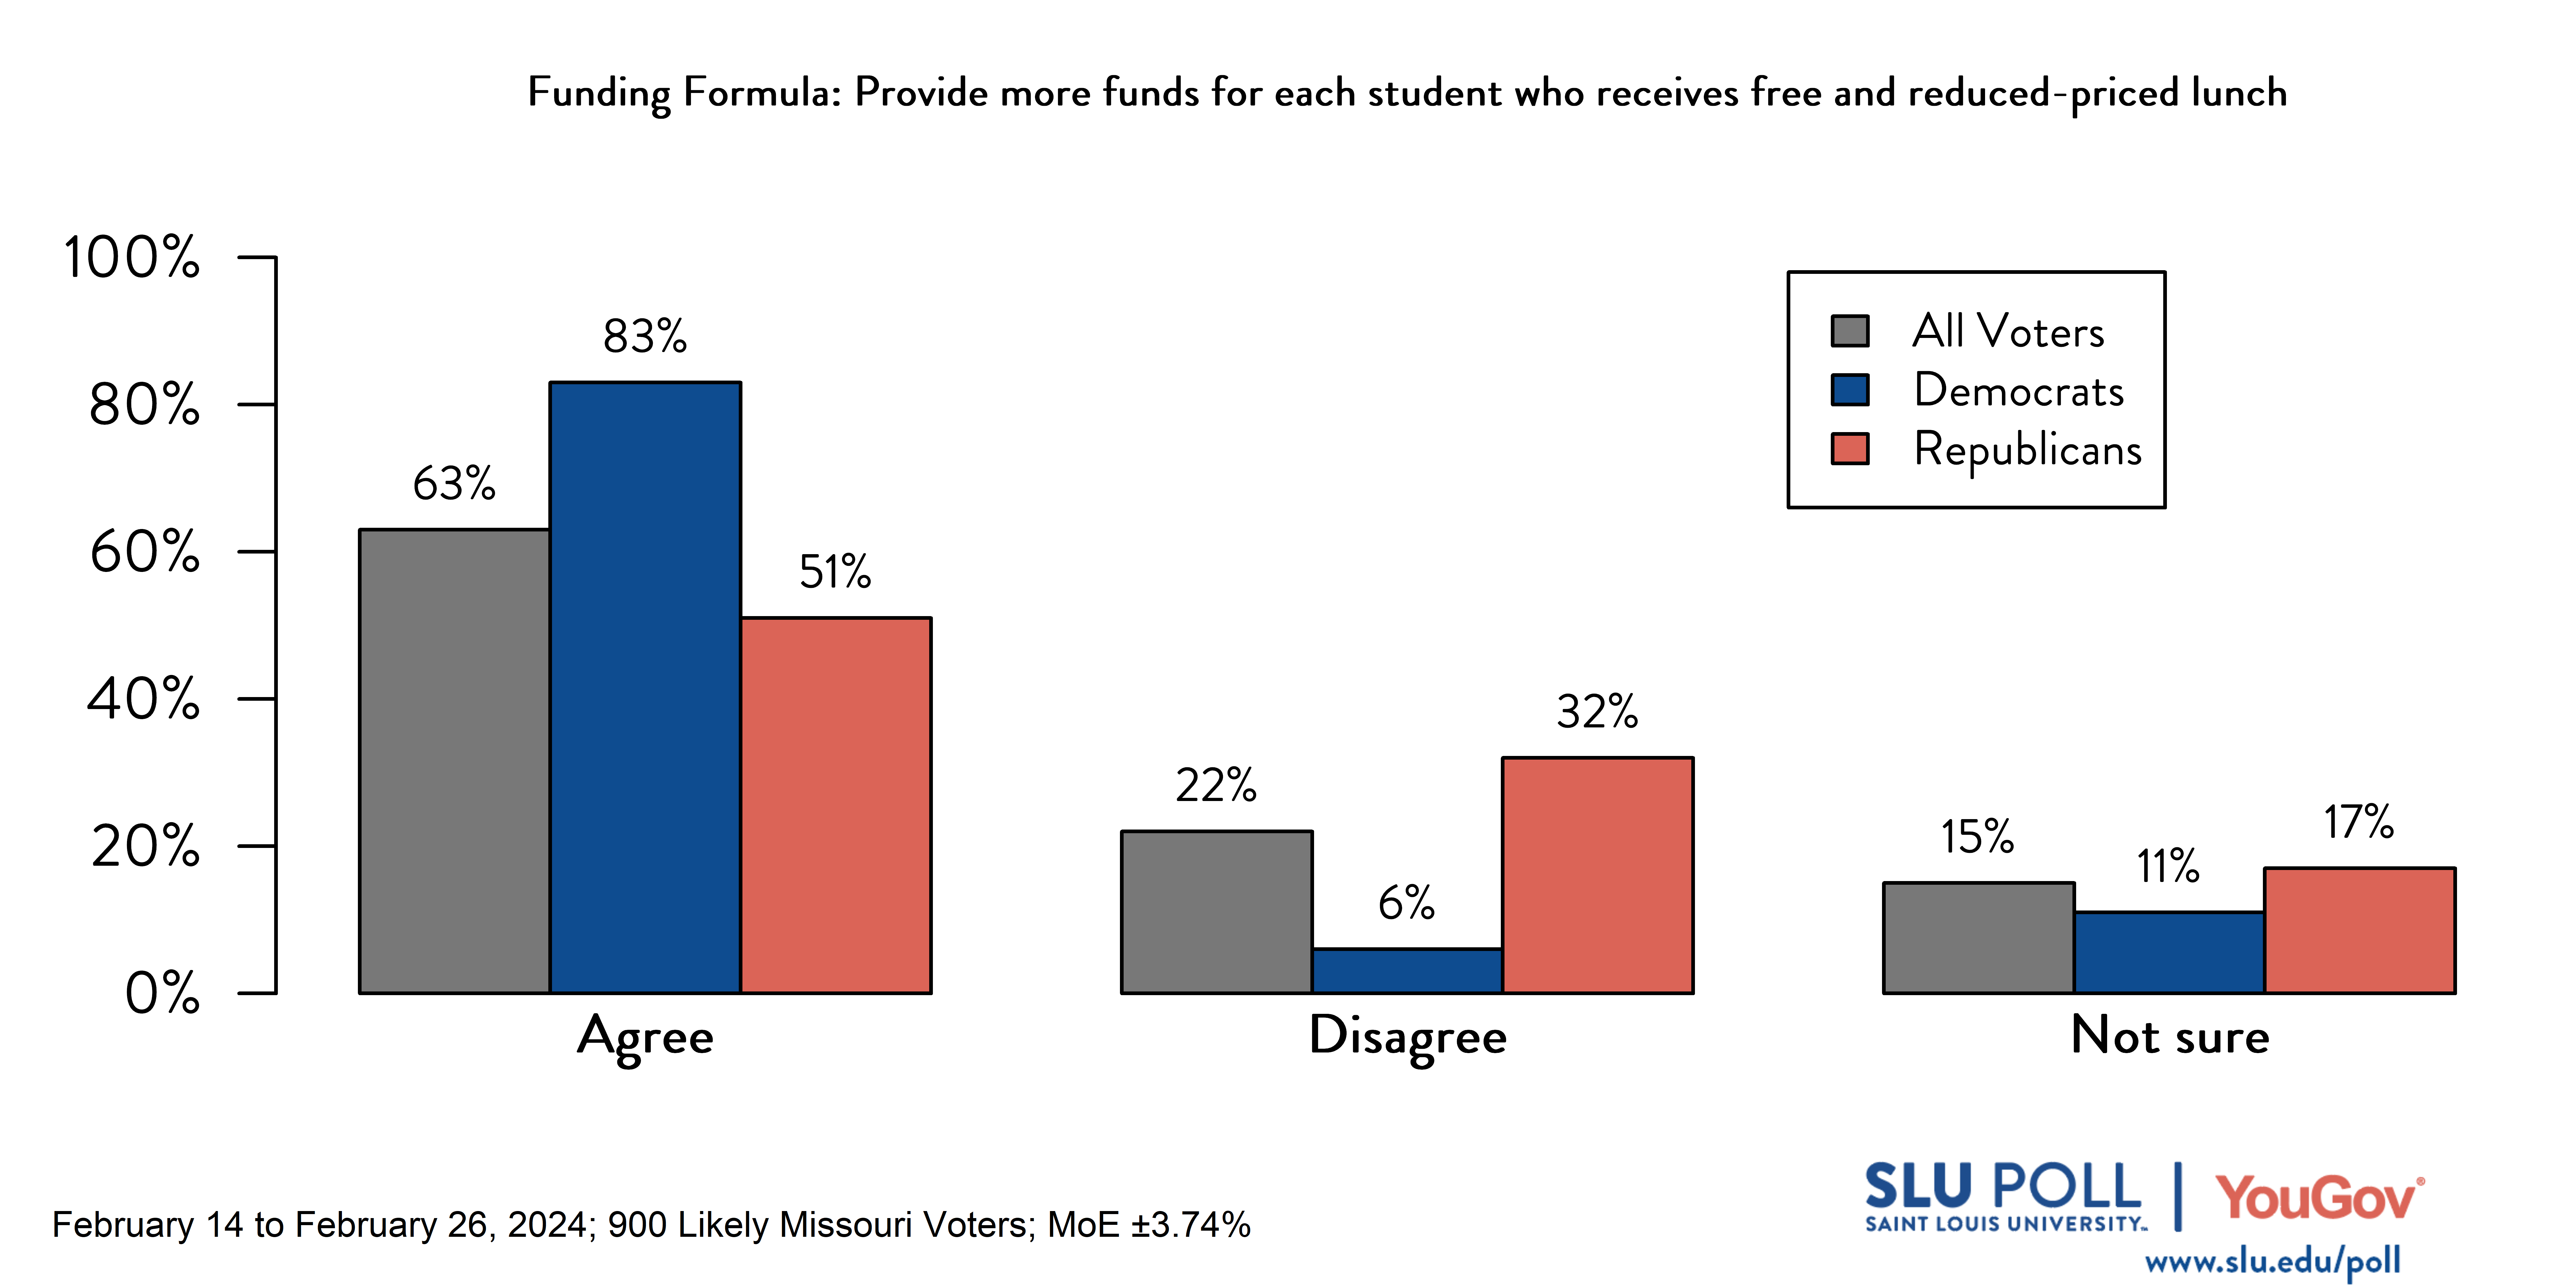 Likely voters' responses to 'Do you agree or disagree that this funding formula should do the following…Provide more funds for each student who receives free and reduced-priced lunch?': 63% Agree, 22% Disagree, and 15% Not Sure. Democratic voters' responses: ' 83% Agree, 6% Disagree, and 11% Not Sure. Republican voters' responses:  51% Agree, 32% Disagree, and 17% Not Sure.